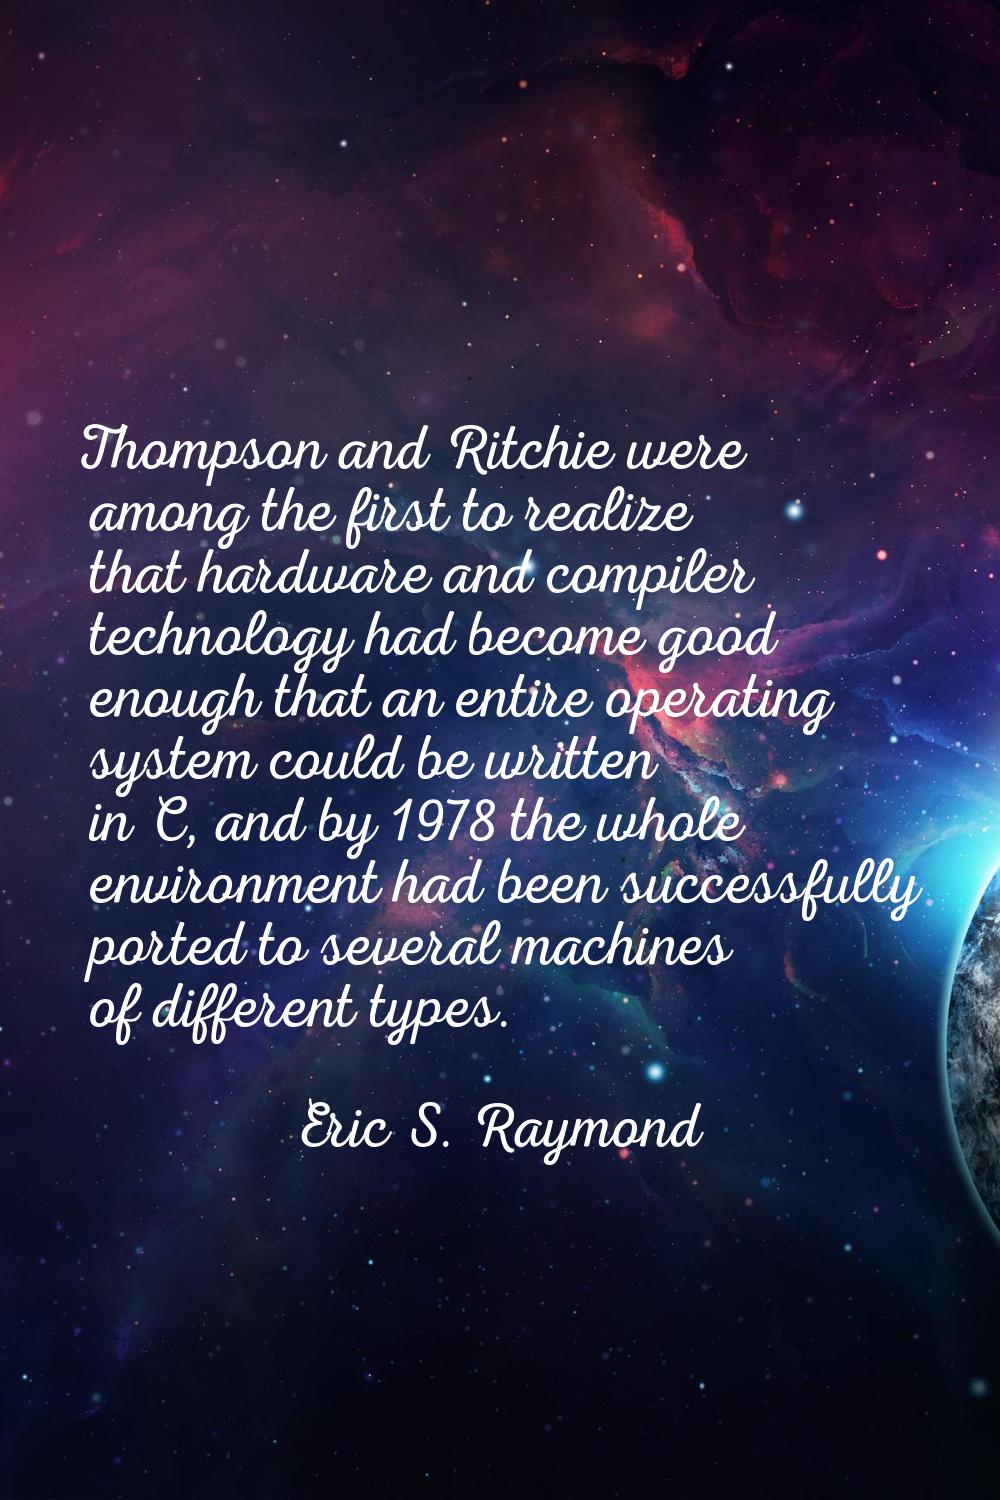 Thompson and Ritchie were among the first to realize that hardware and compiler technology had beco